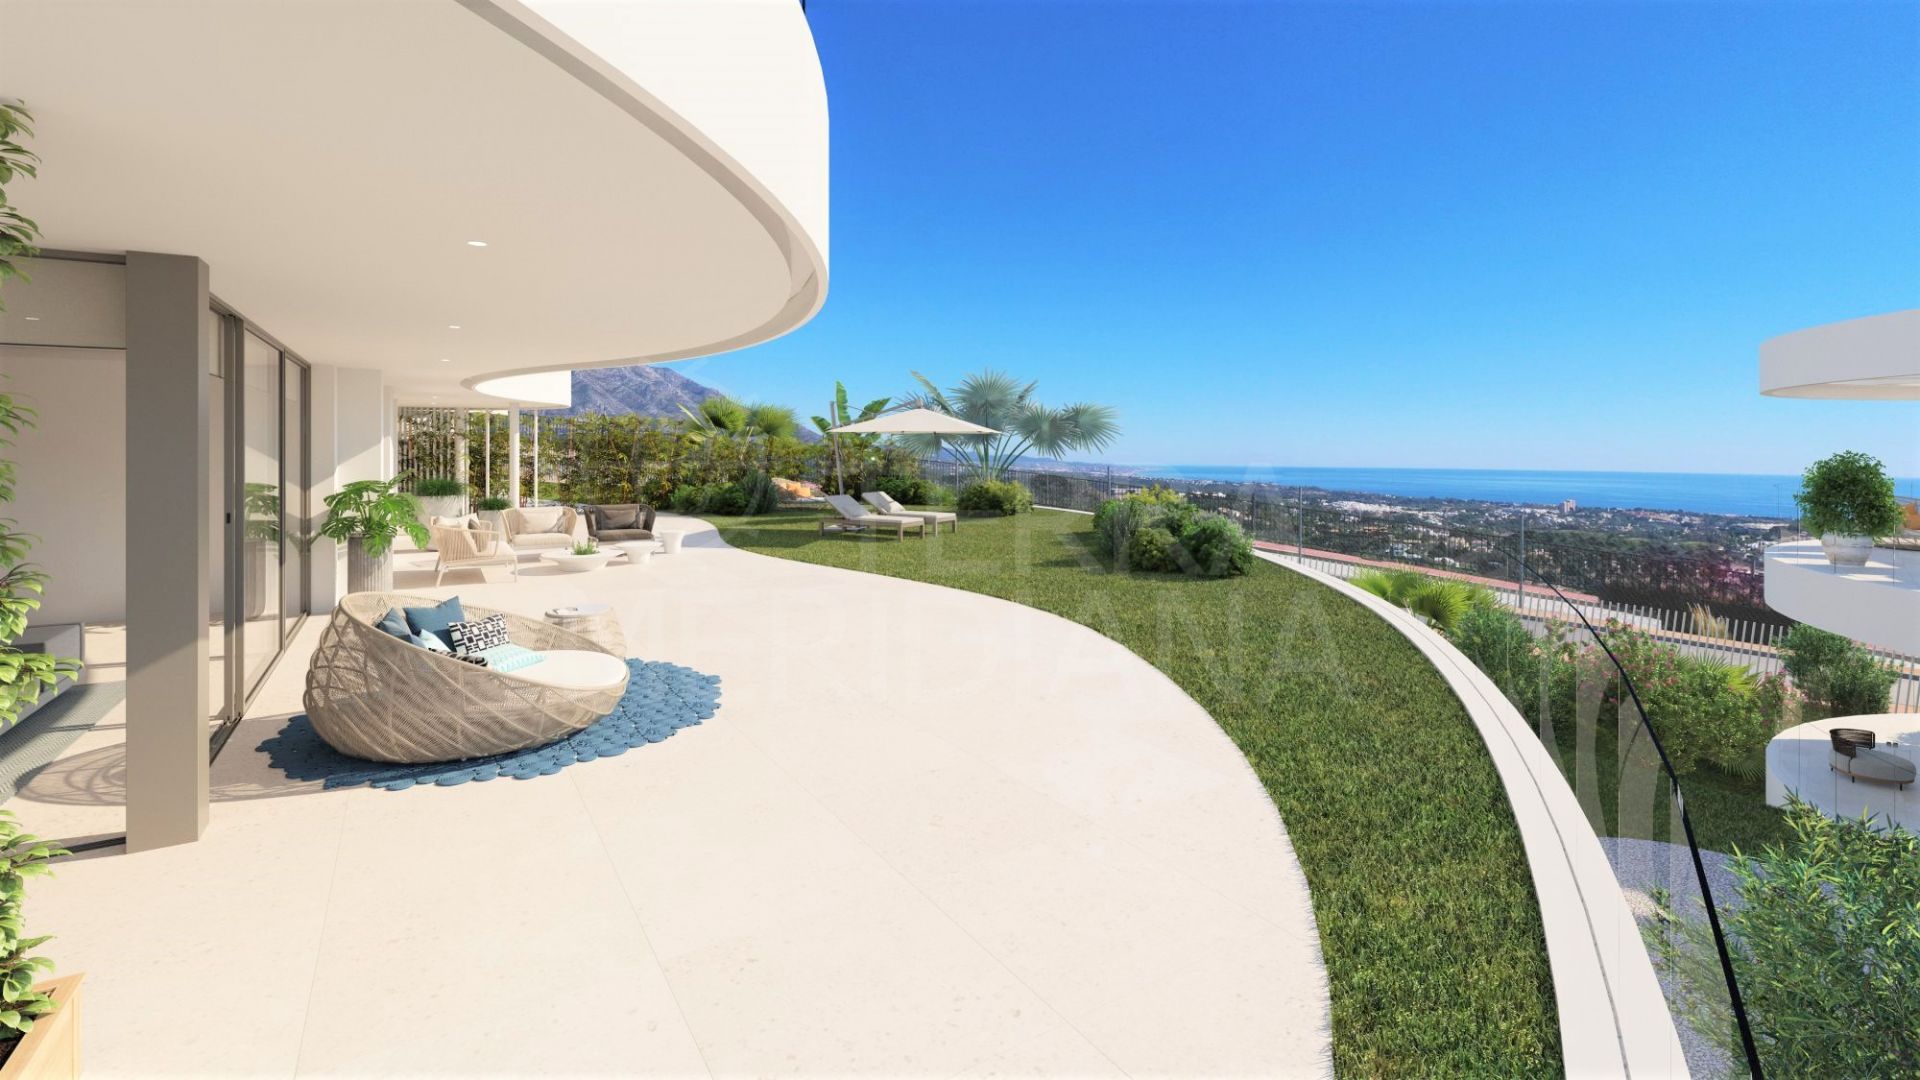 The View Marbella, Benahavis - The View Marbella, Benahavis - a brand new development with a prominent position above the coast